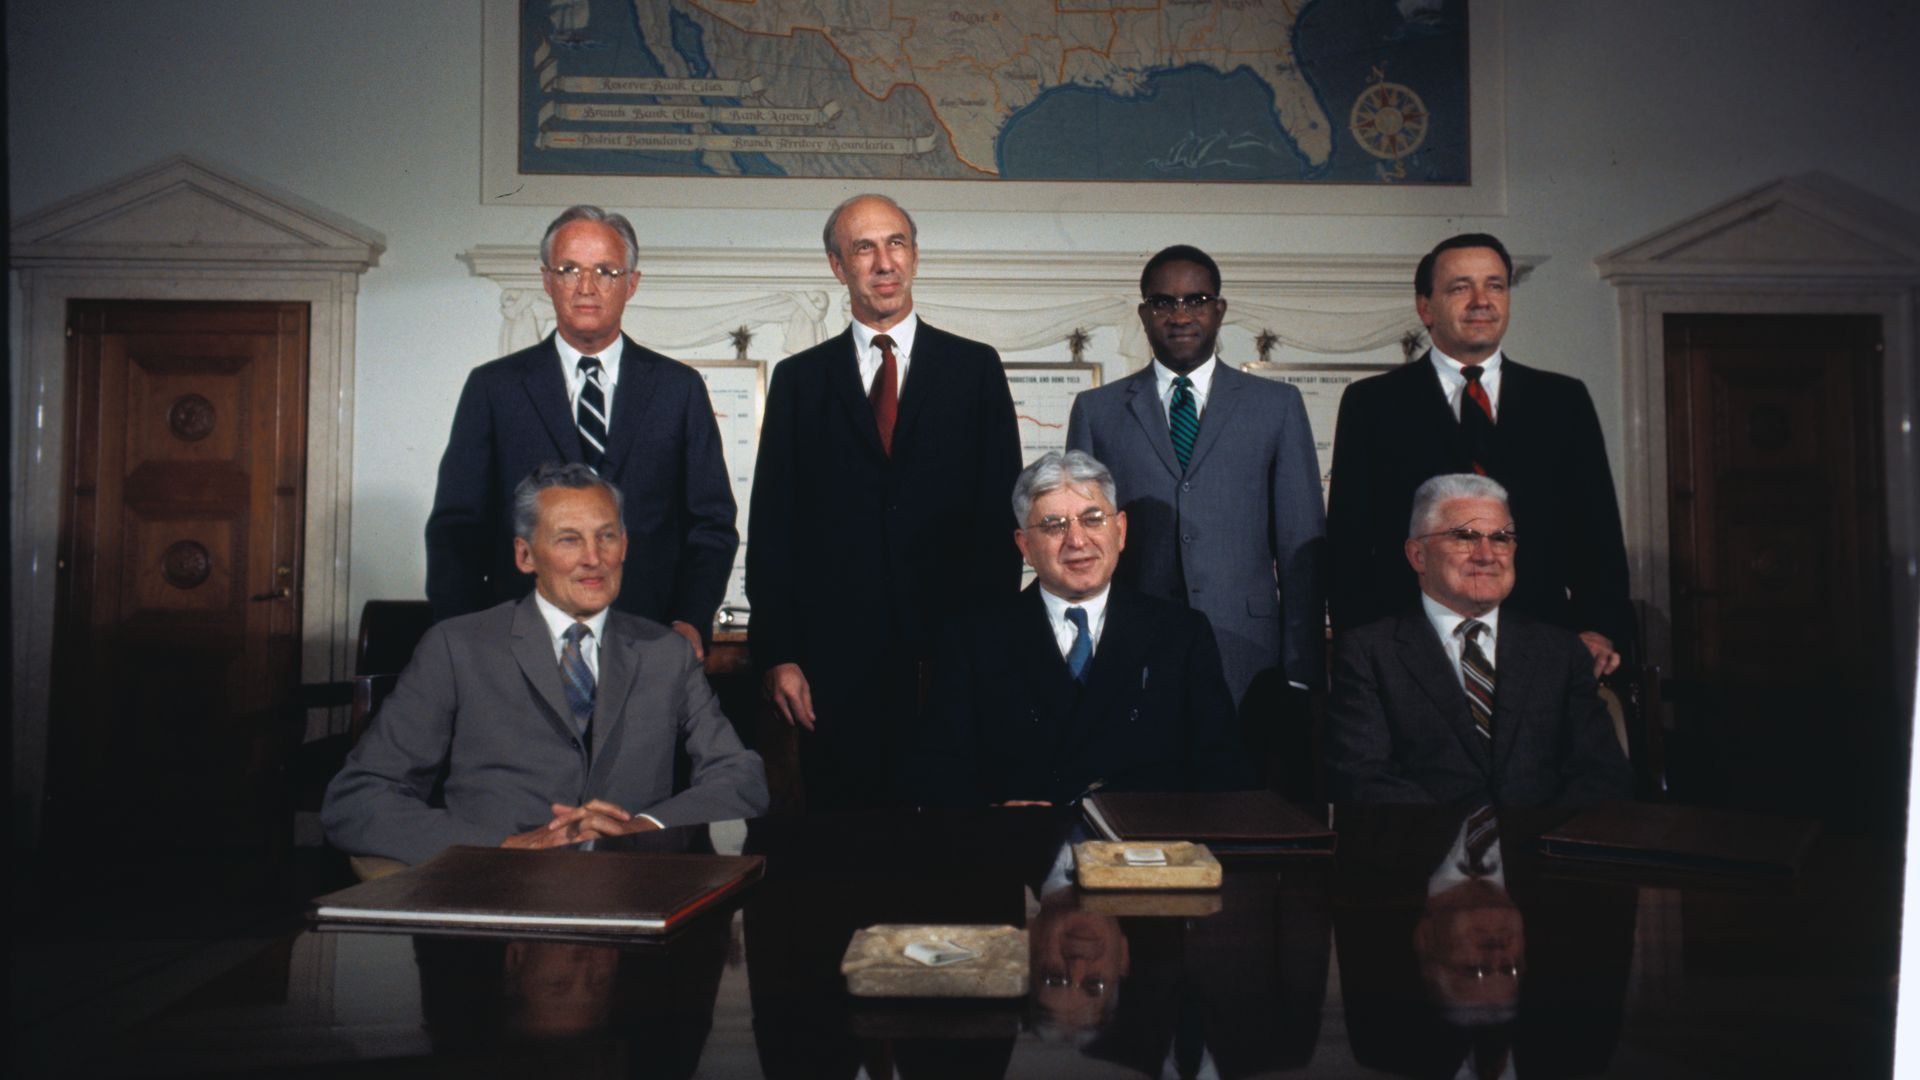 Members of the Federal Reserve Board of Governors, including Andrew Brimmer, in 1970